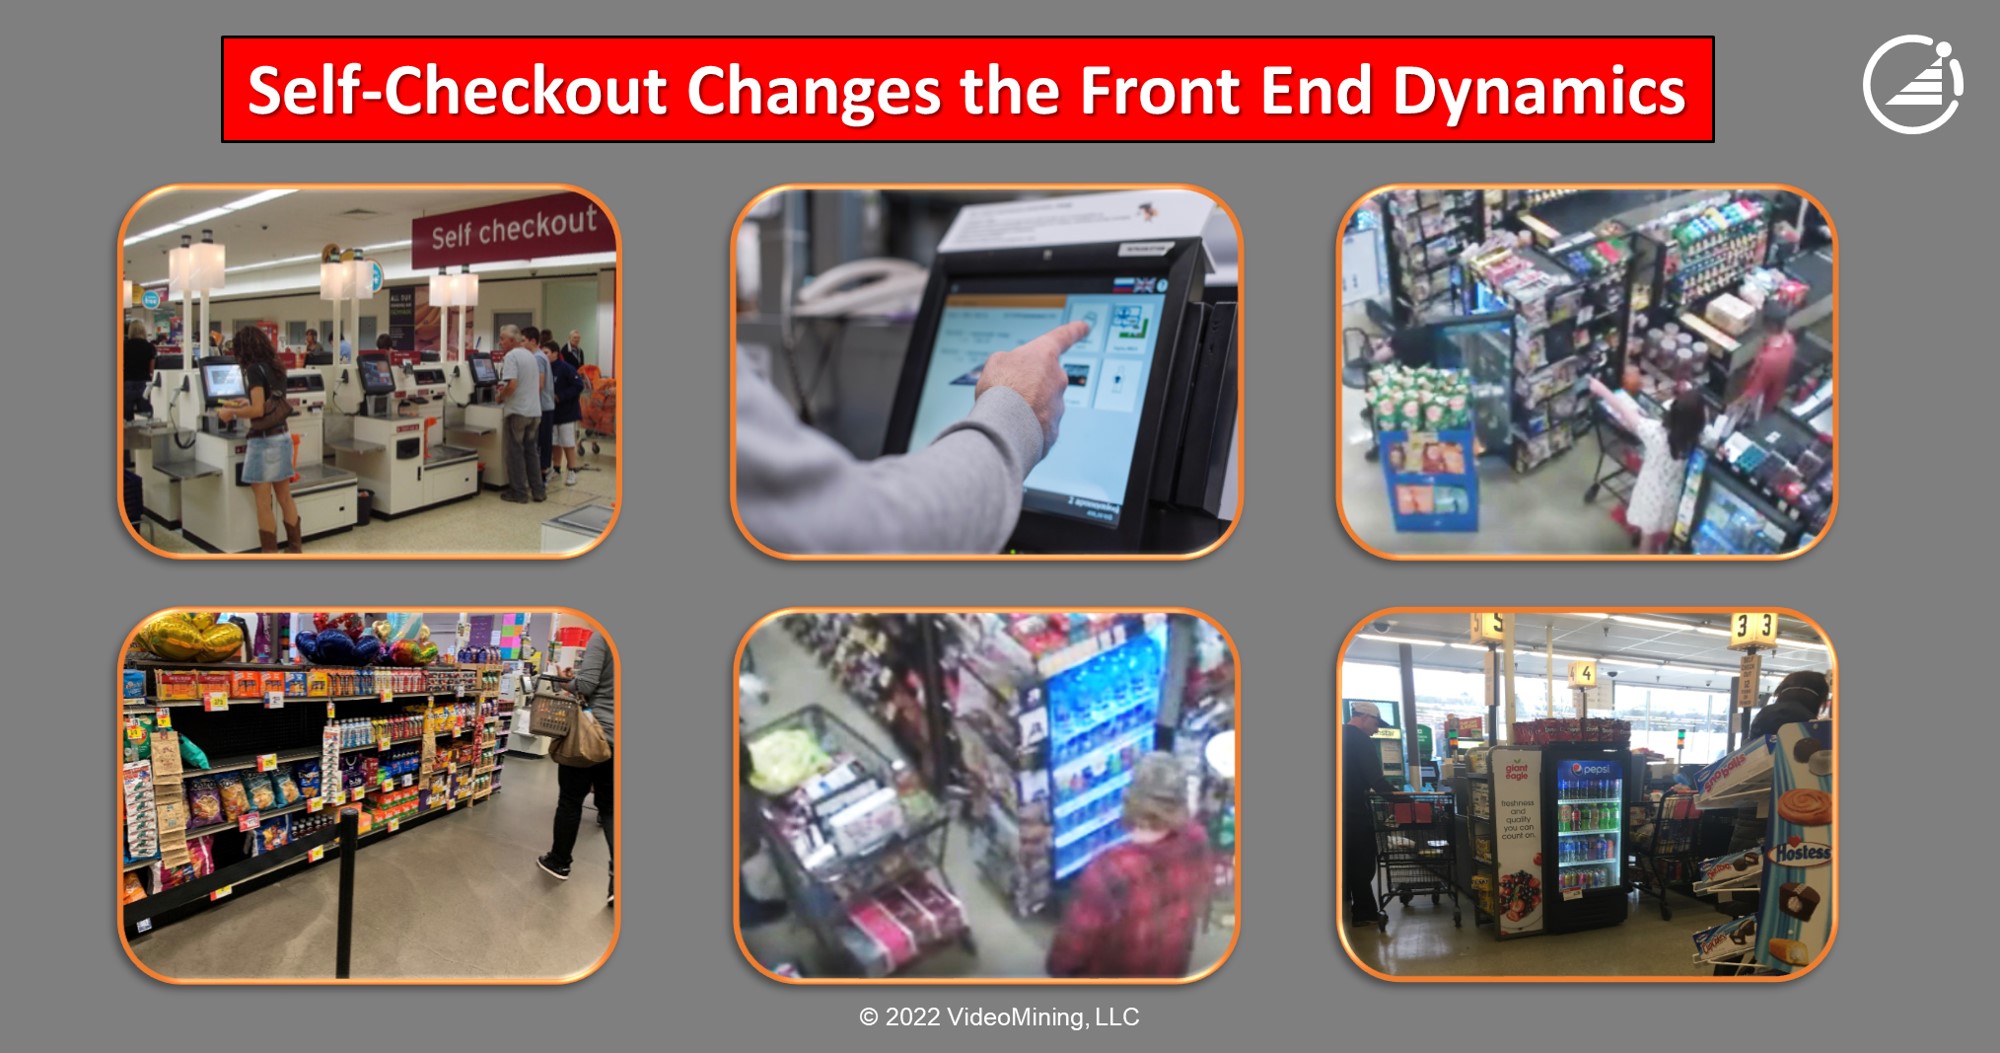 Self-Checkout Changes the Front End Dynamics